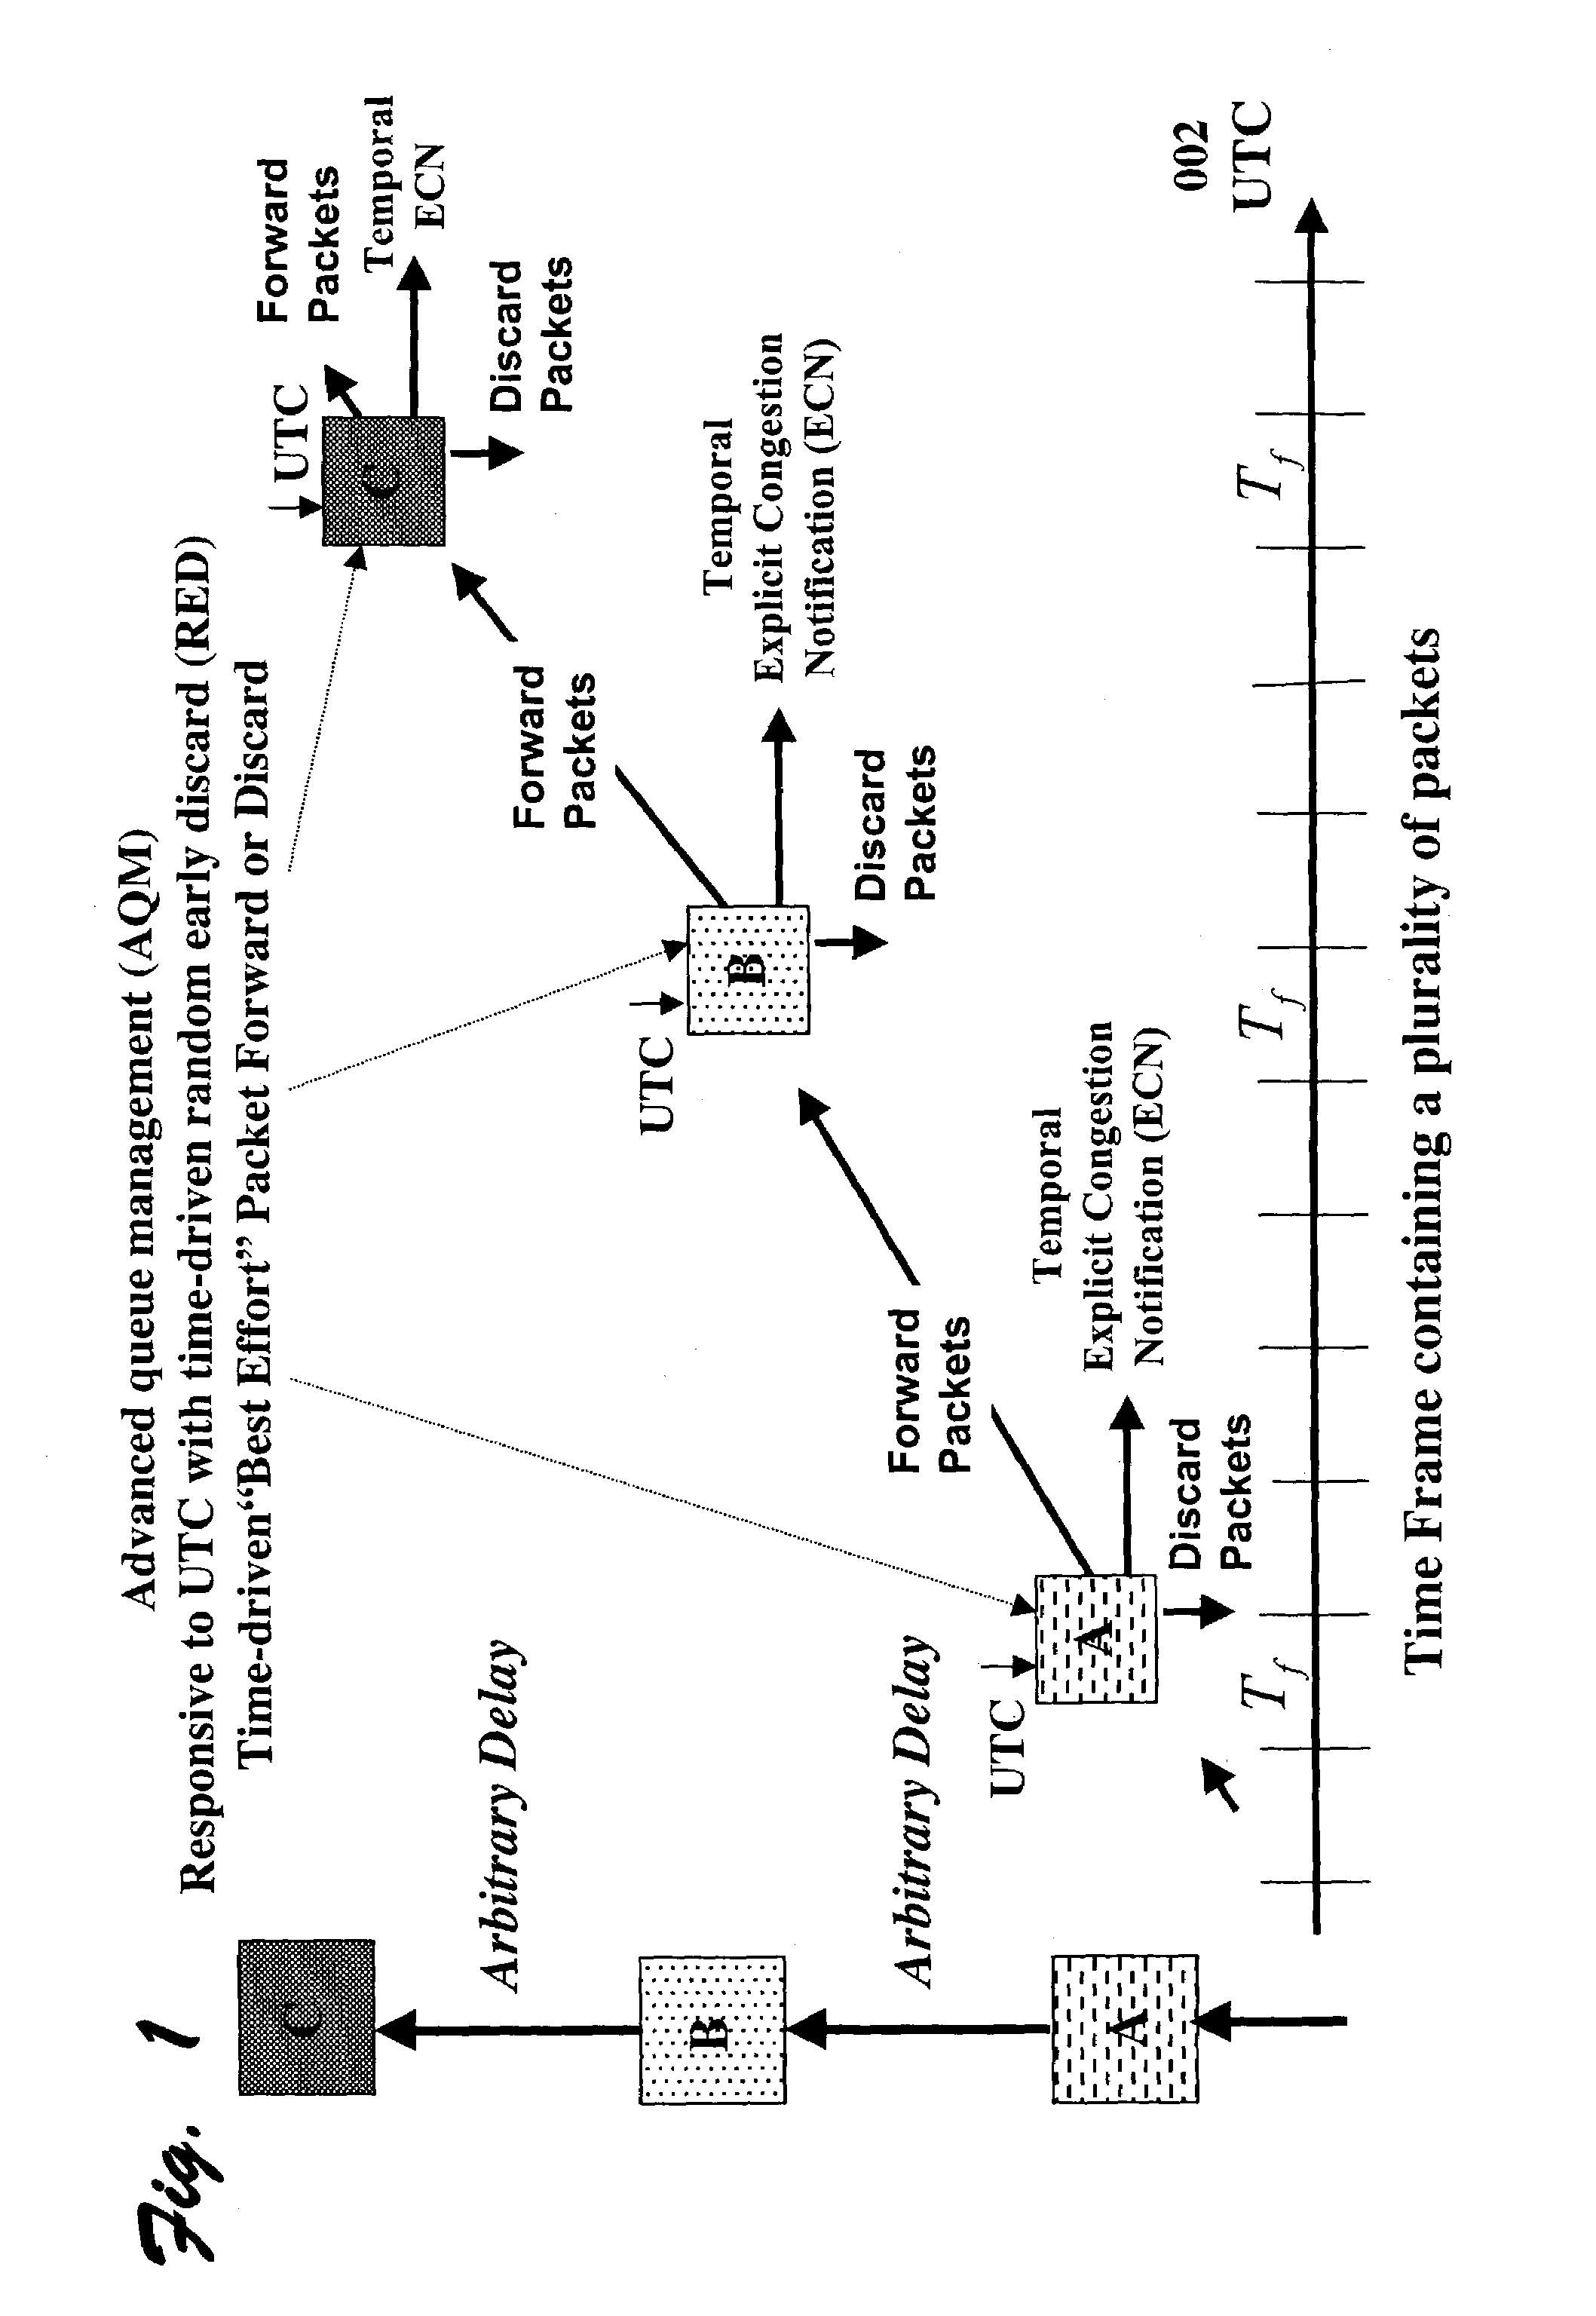 Window flow control with common time reference